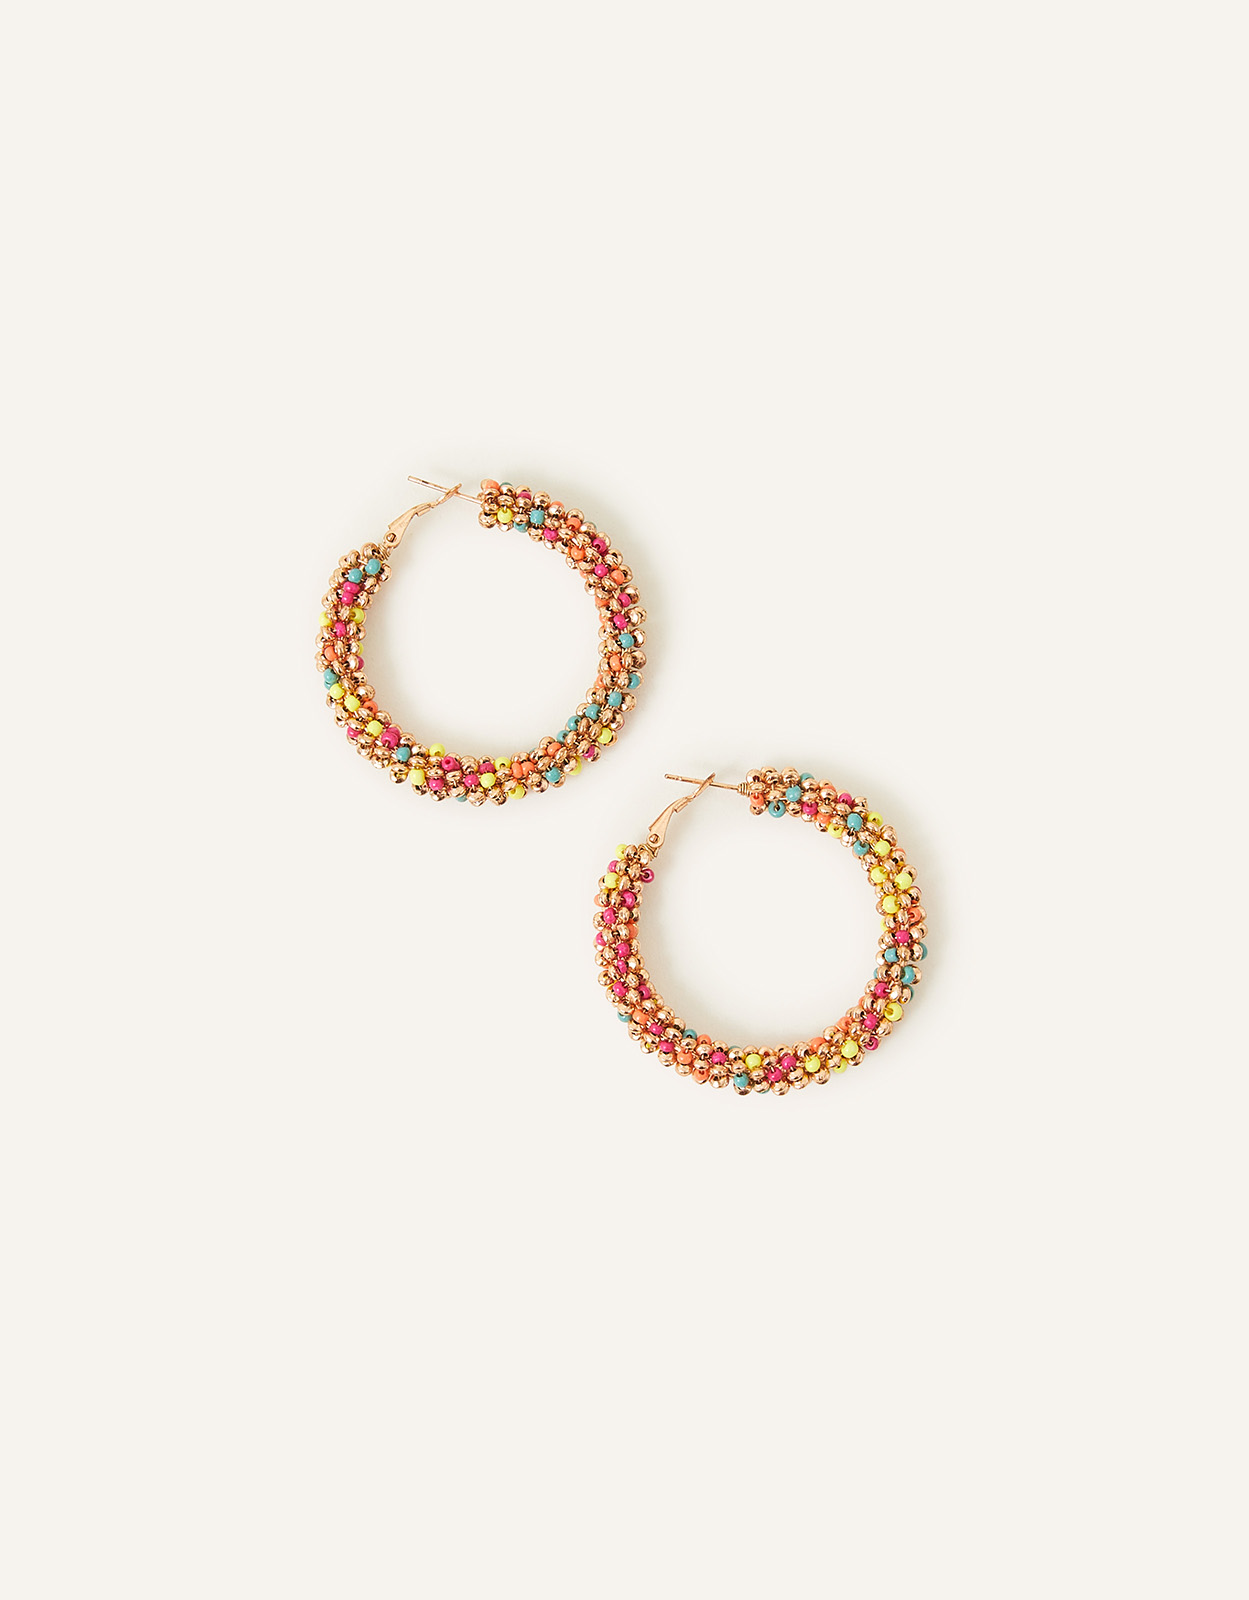 Accessorize Women's Gold, Orange and Green Chunky Beaded Hoop Earrings, Size: 4cm